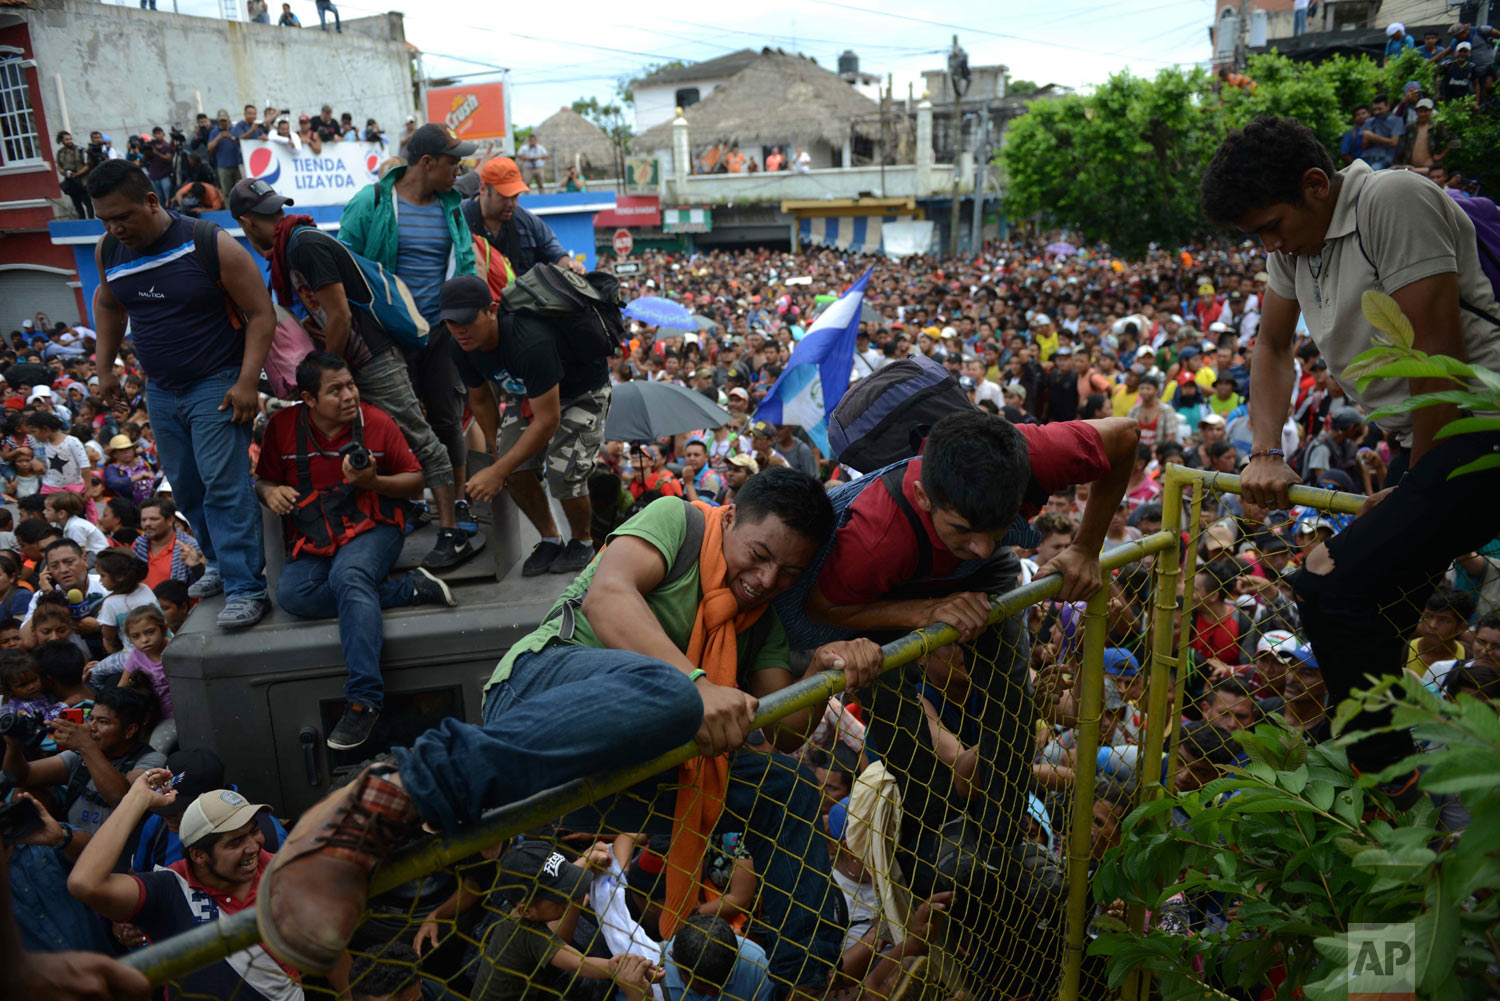  Thousands of Central American migrants rush across the border towards Mexico, in Tecun Uman, Guatemala, Friday, Oct. 19, 2018, as part of a second migrant caravan. After arriving at the tall, yellow metal fence some clambered atop it and on U.S.-don